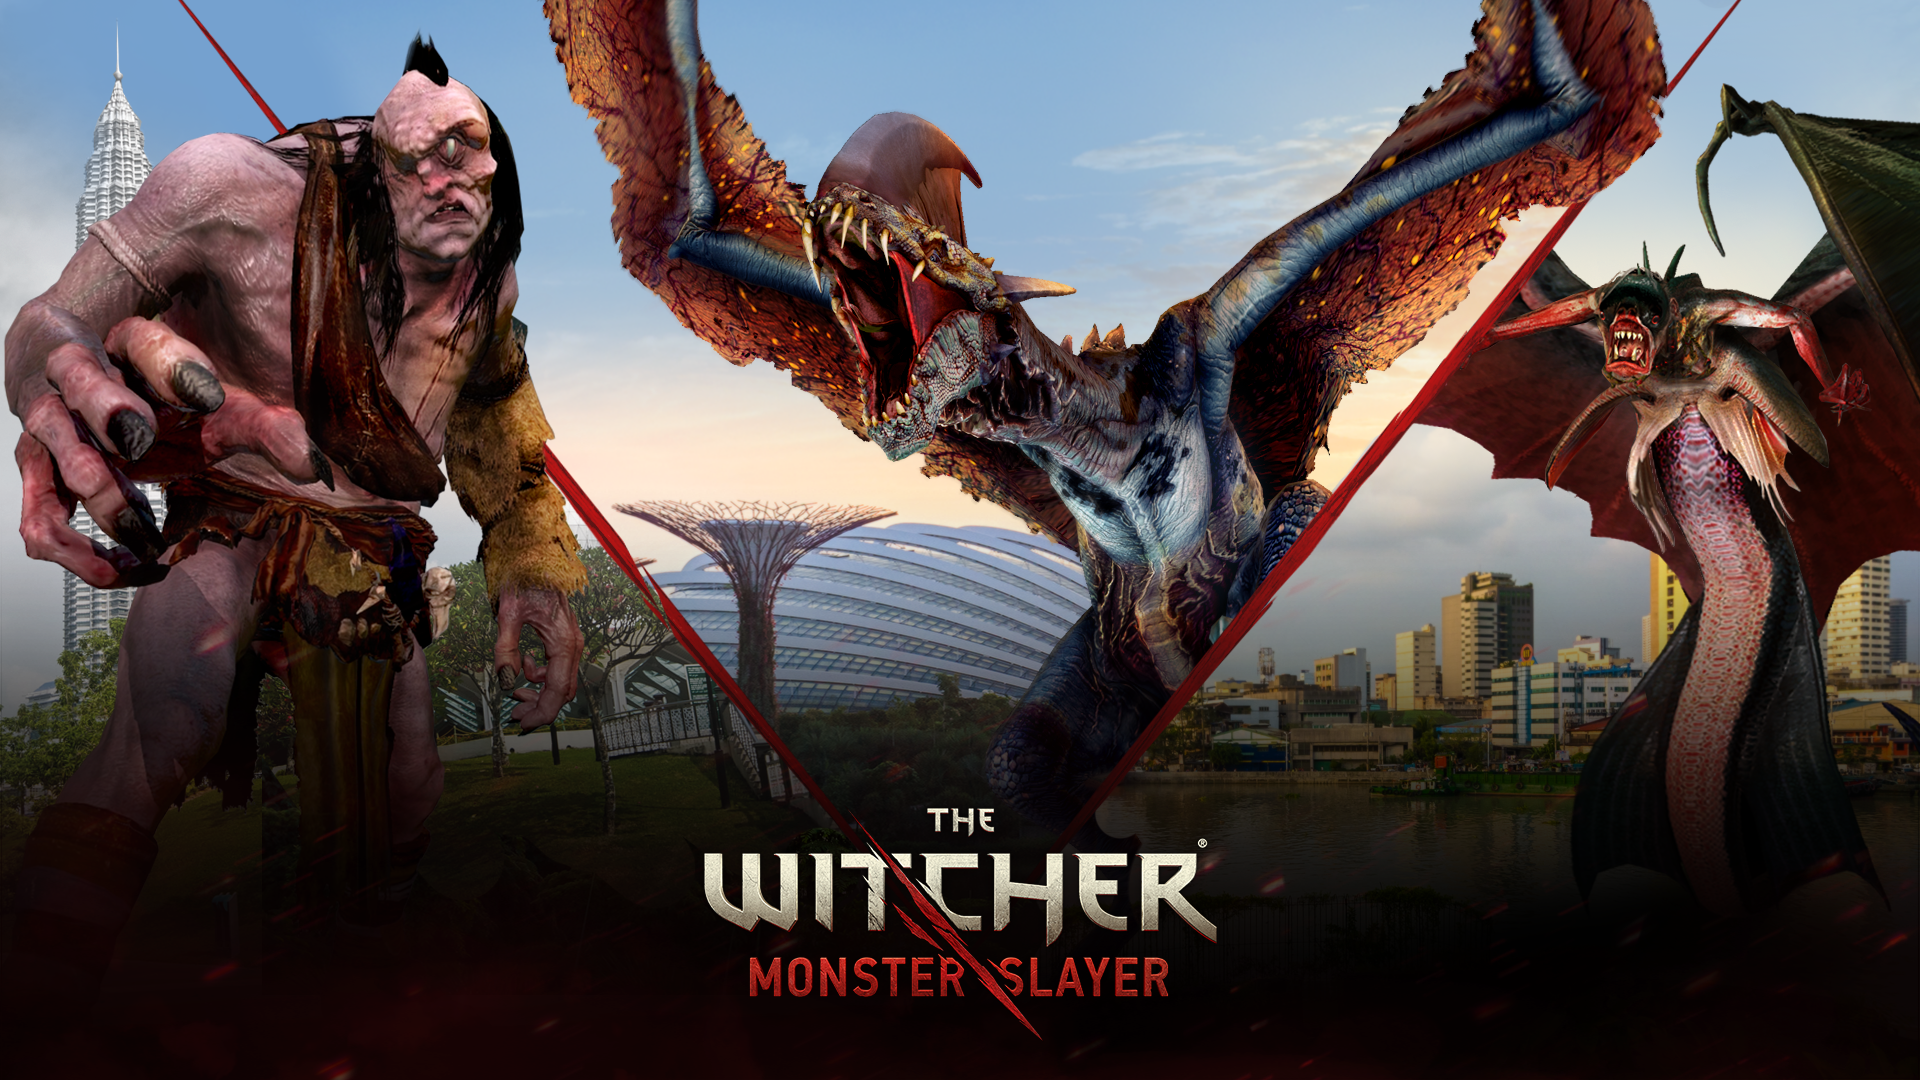 Monsters in the witcher 3 фото 75